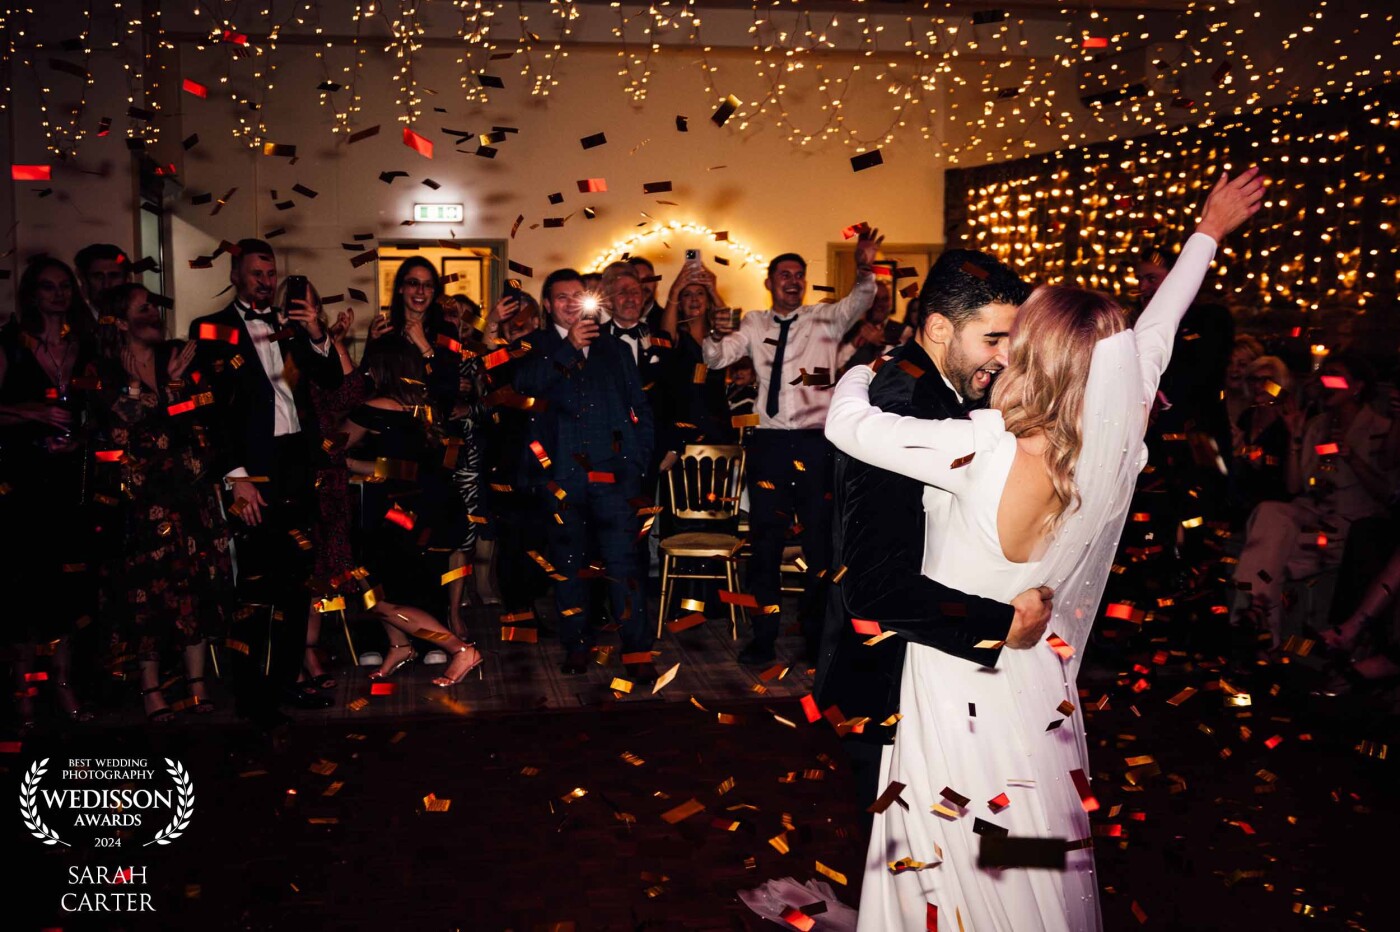 This was taken New Years Eve at The William Cecil I'm Stamford. My couple had an incredible day this moment summed it up perfectly.